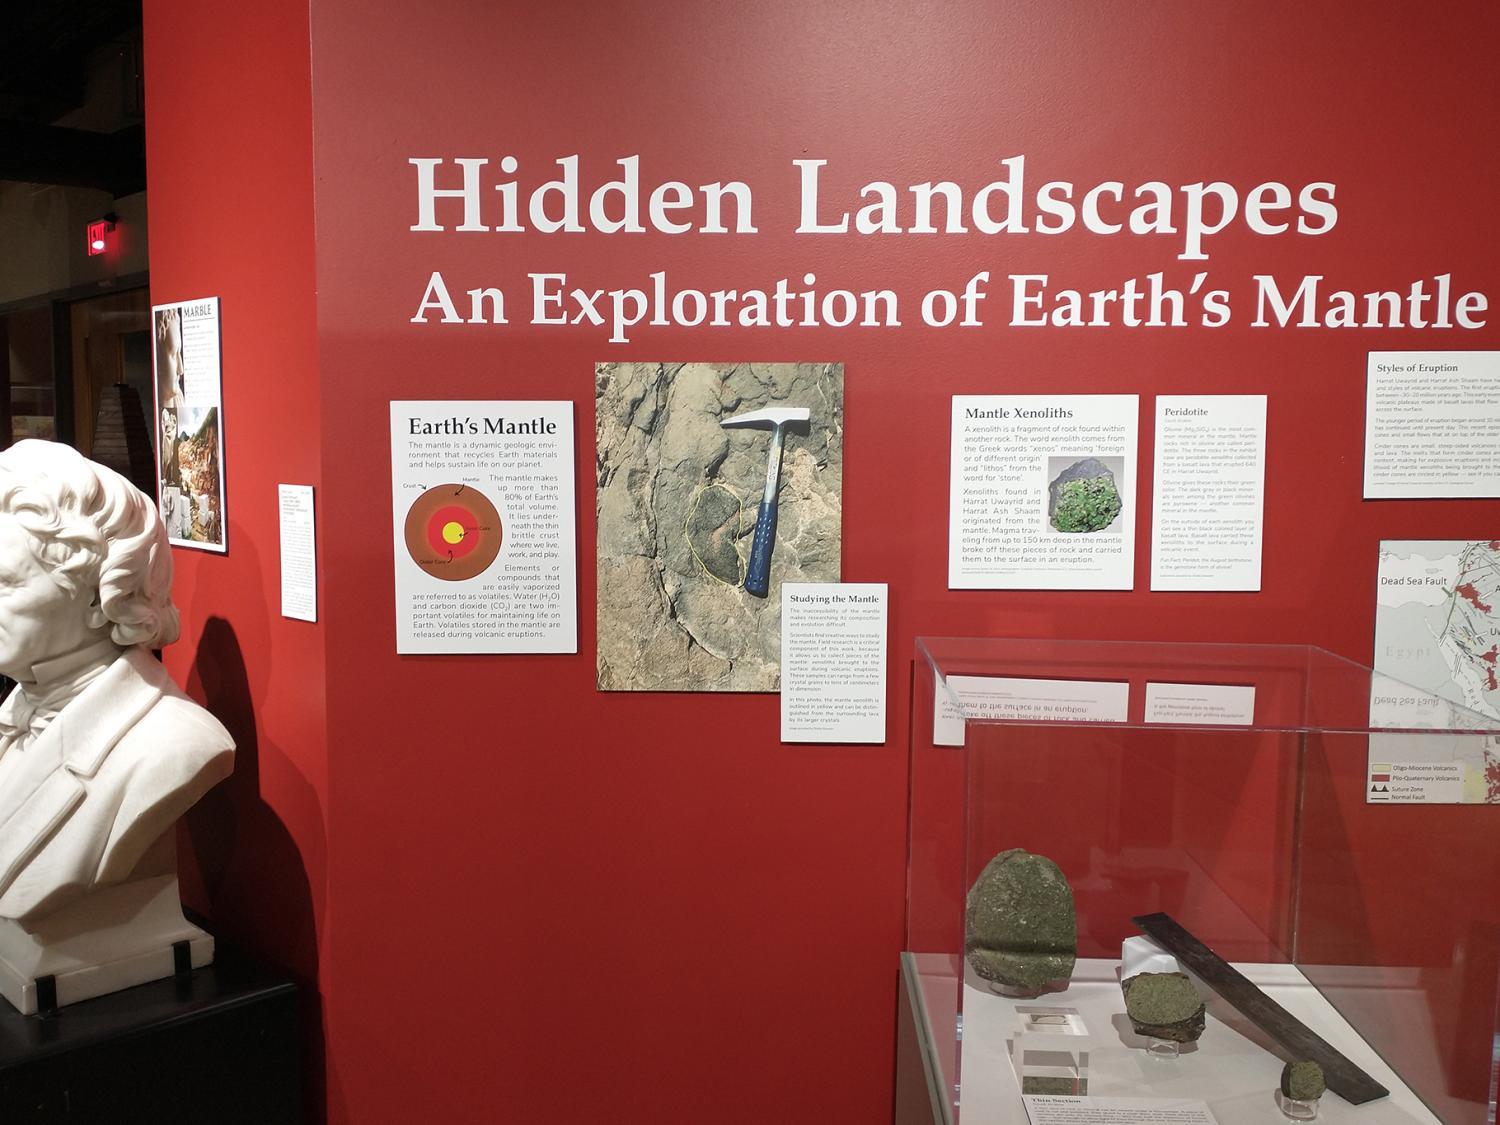 “Hidden Landscapes: An Exploration of Earth’s Mantle” will open from 3 to 4 p.m. Oct. 4 in the Earth and Mineral Sciences Museum and Art Gallery 